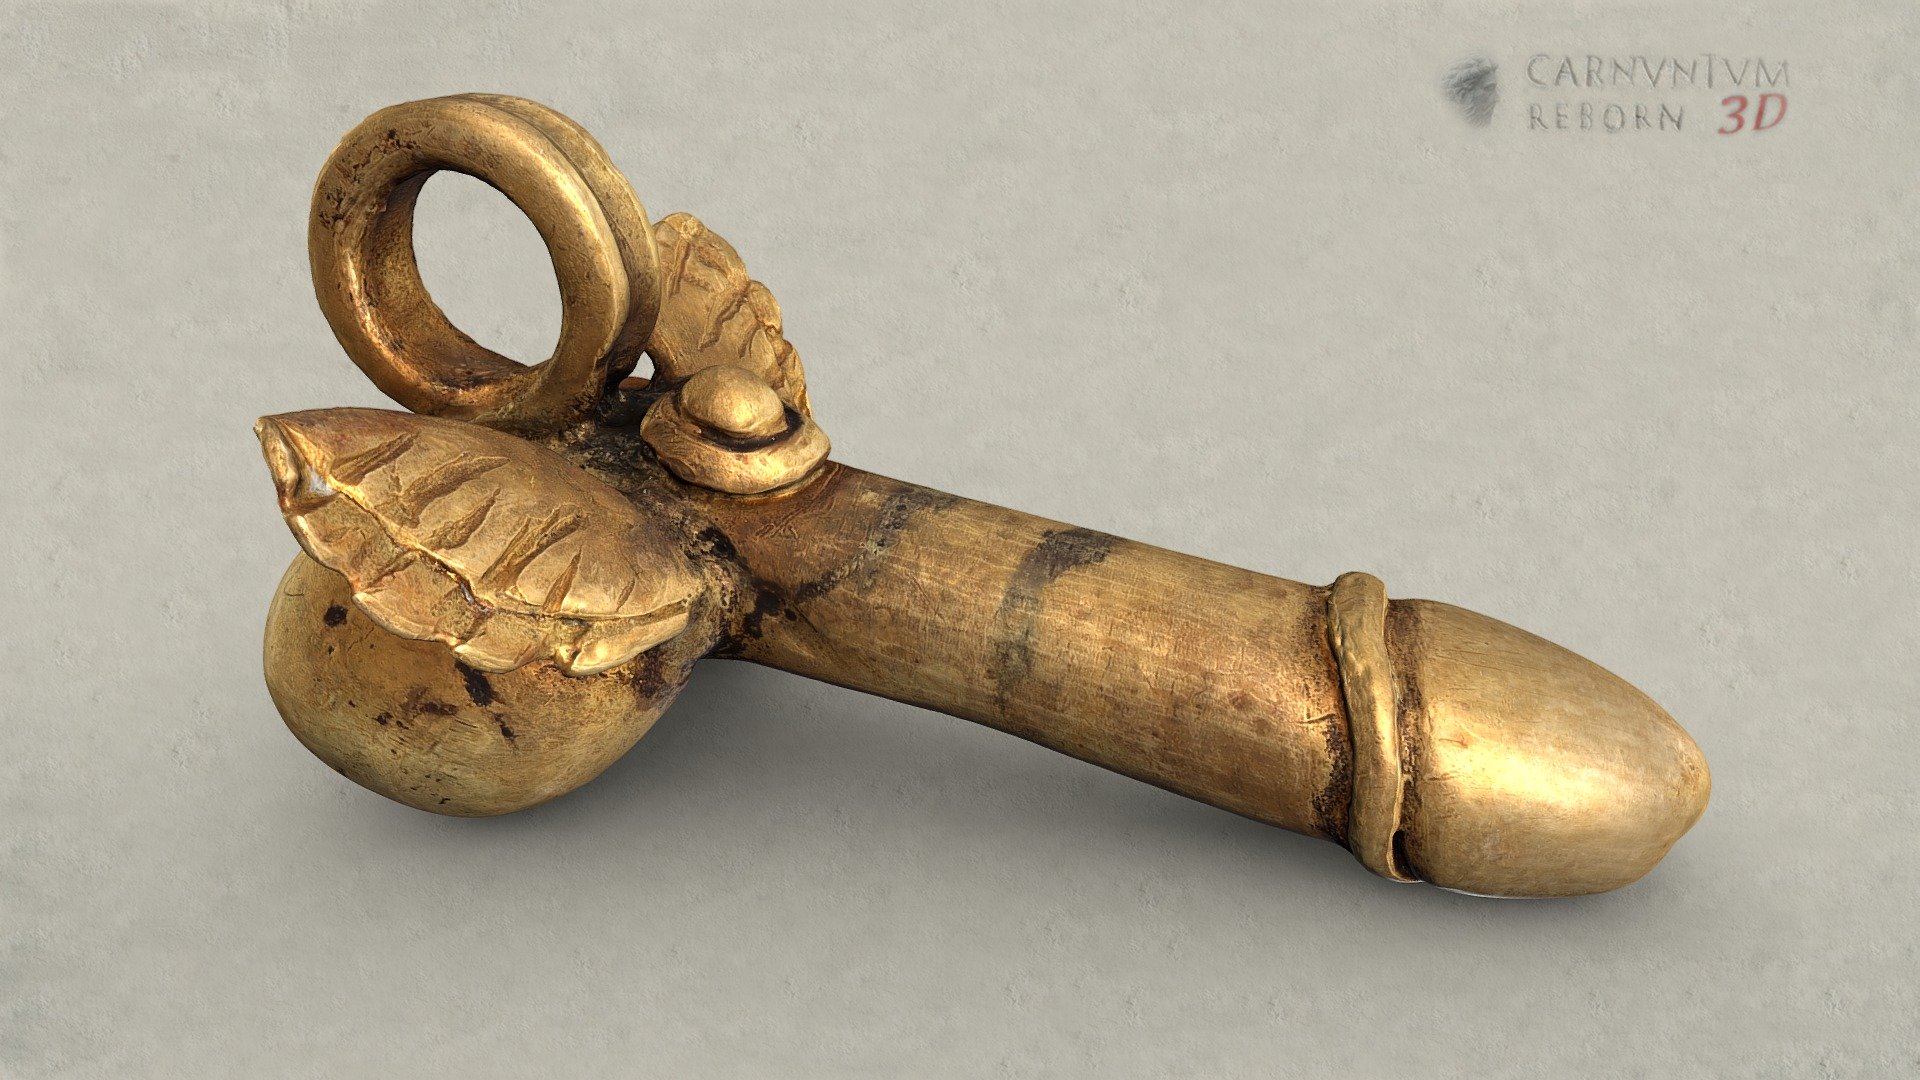 Roman gold pendant in phallus shape. The solid gold phallus with hanging loop is winged. Gold; l 2,8 cm; h 1,2 cm.

Model: © Landessammlungen Niederösterreich, Niederösterreich 3D - Anhänger in Phallusform - 3D model by noe-3d.at (@www.noe-3d.at) 3d model